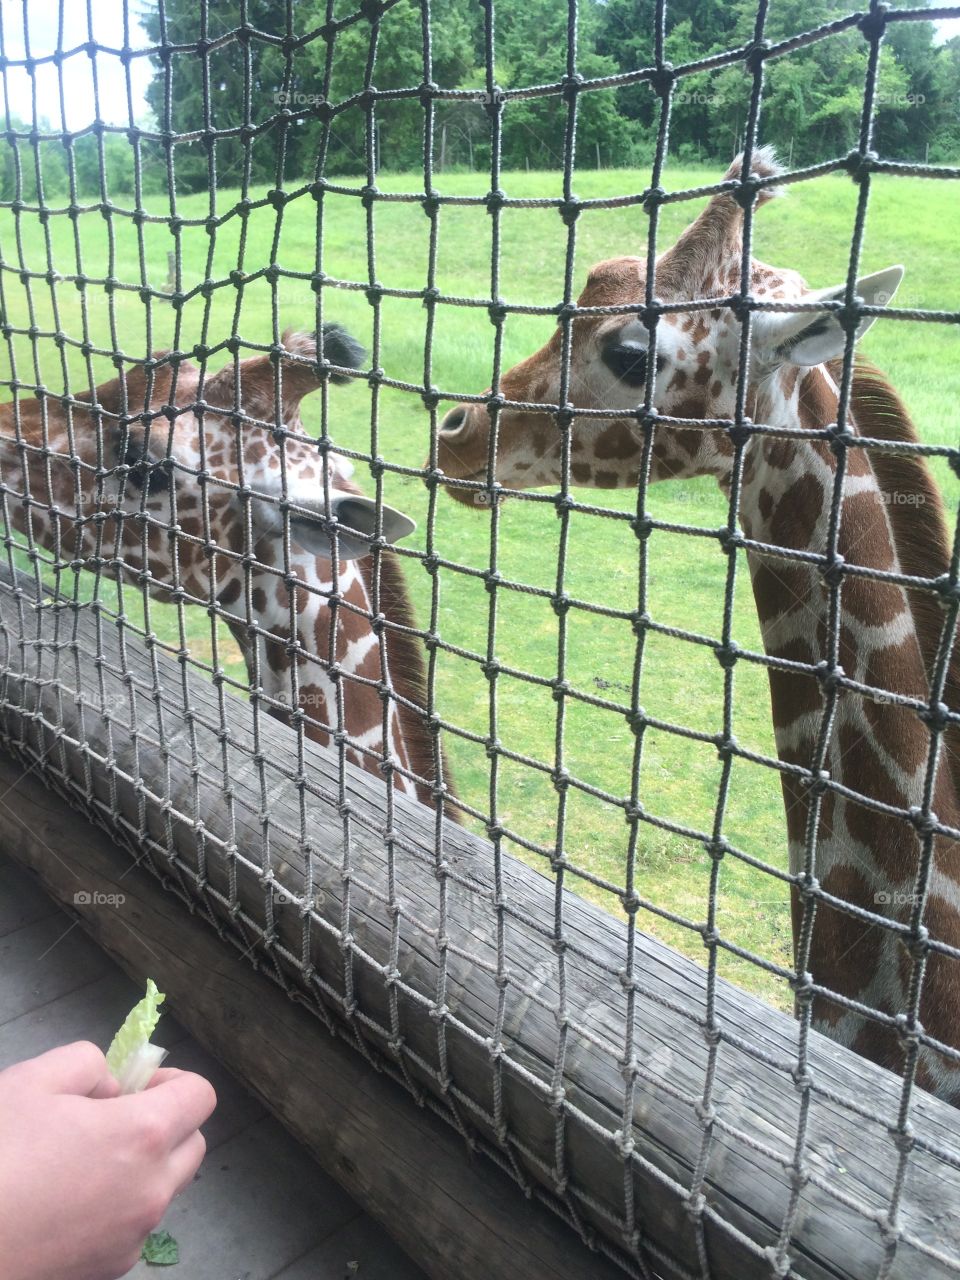 Giraffes at the zoo!